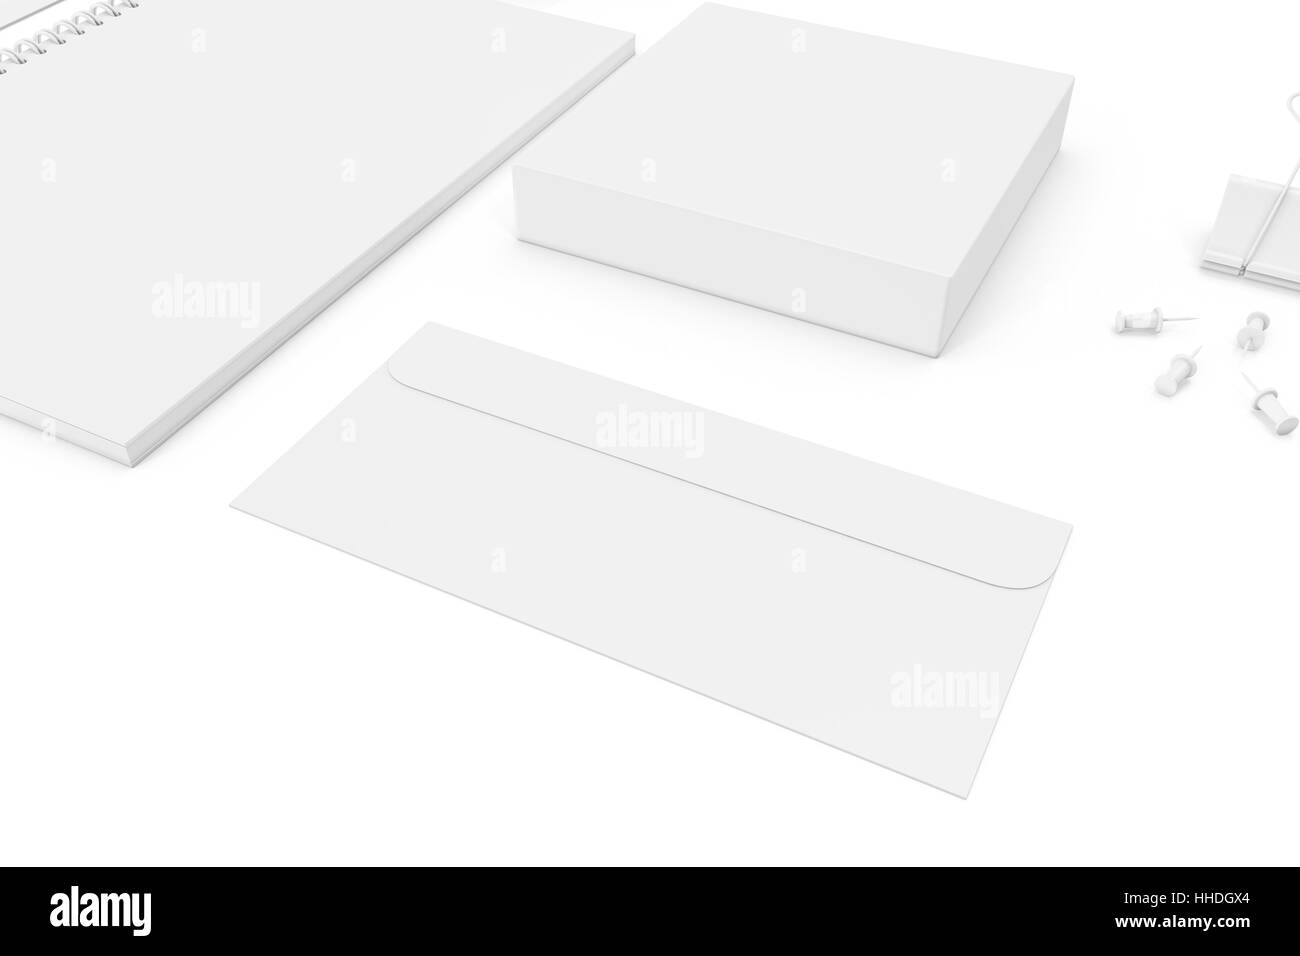 White blank ultimate set of printing materials template for branding identity. 3d rendering Stock Photo